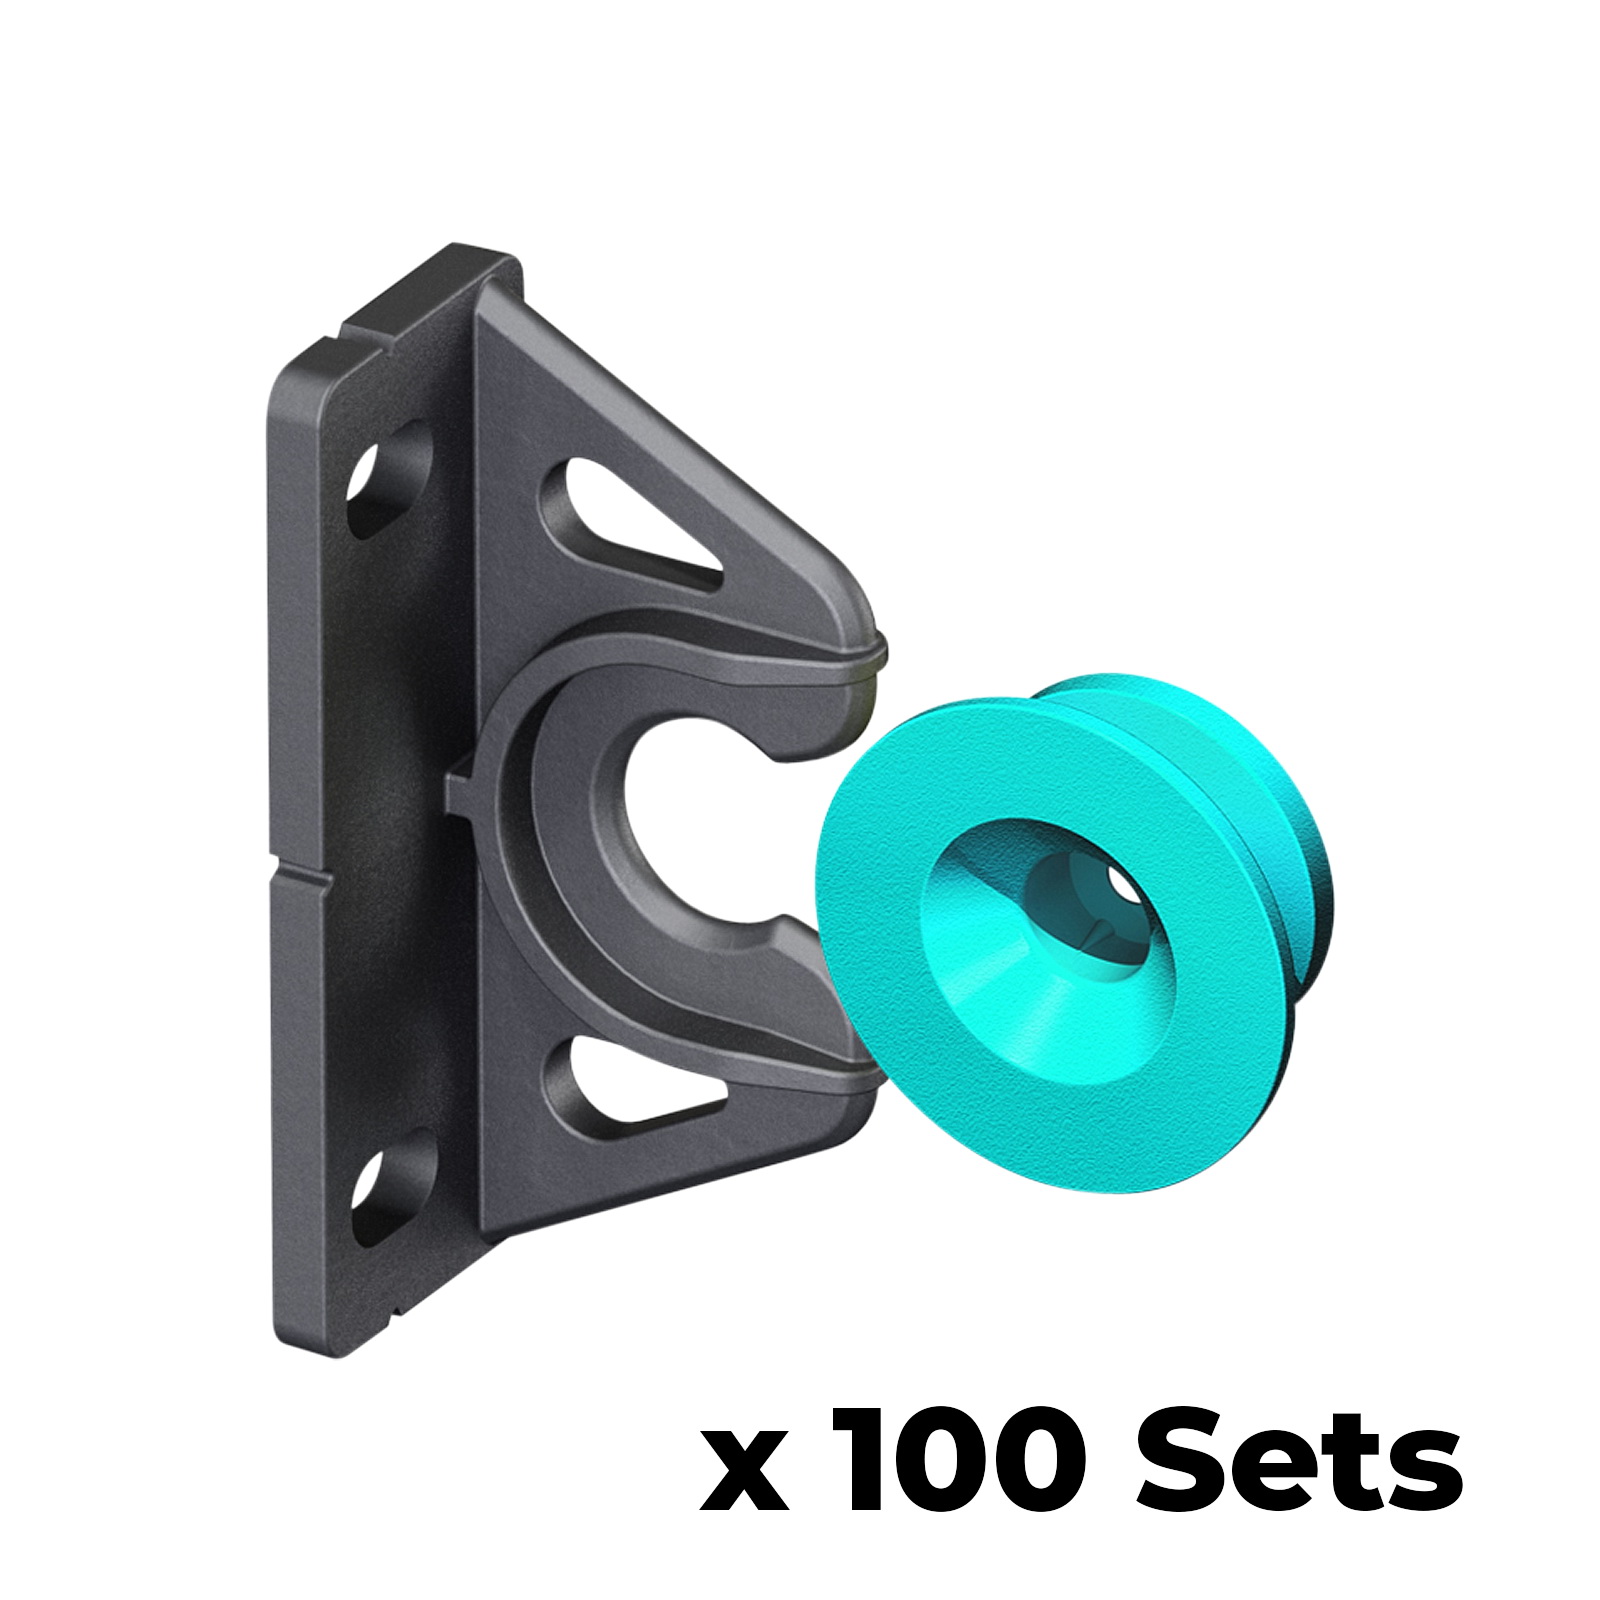 Button Fix Type 2 Bracket Marker Connecting 90º Degree Panels with New Upgraded Button x100